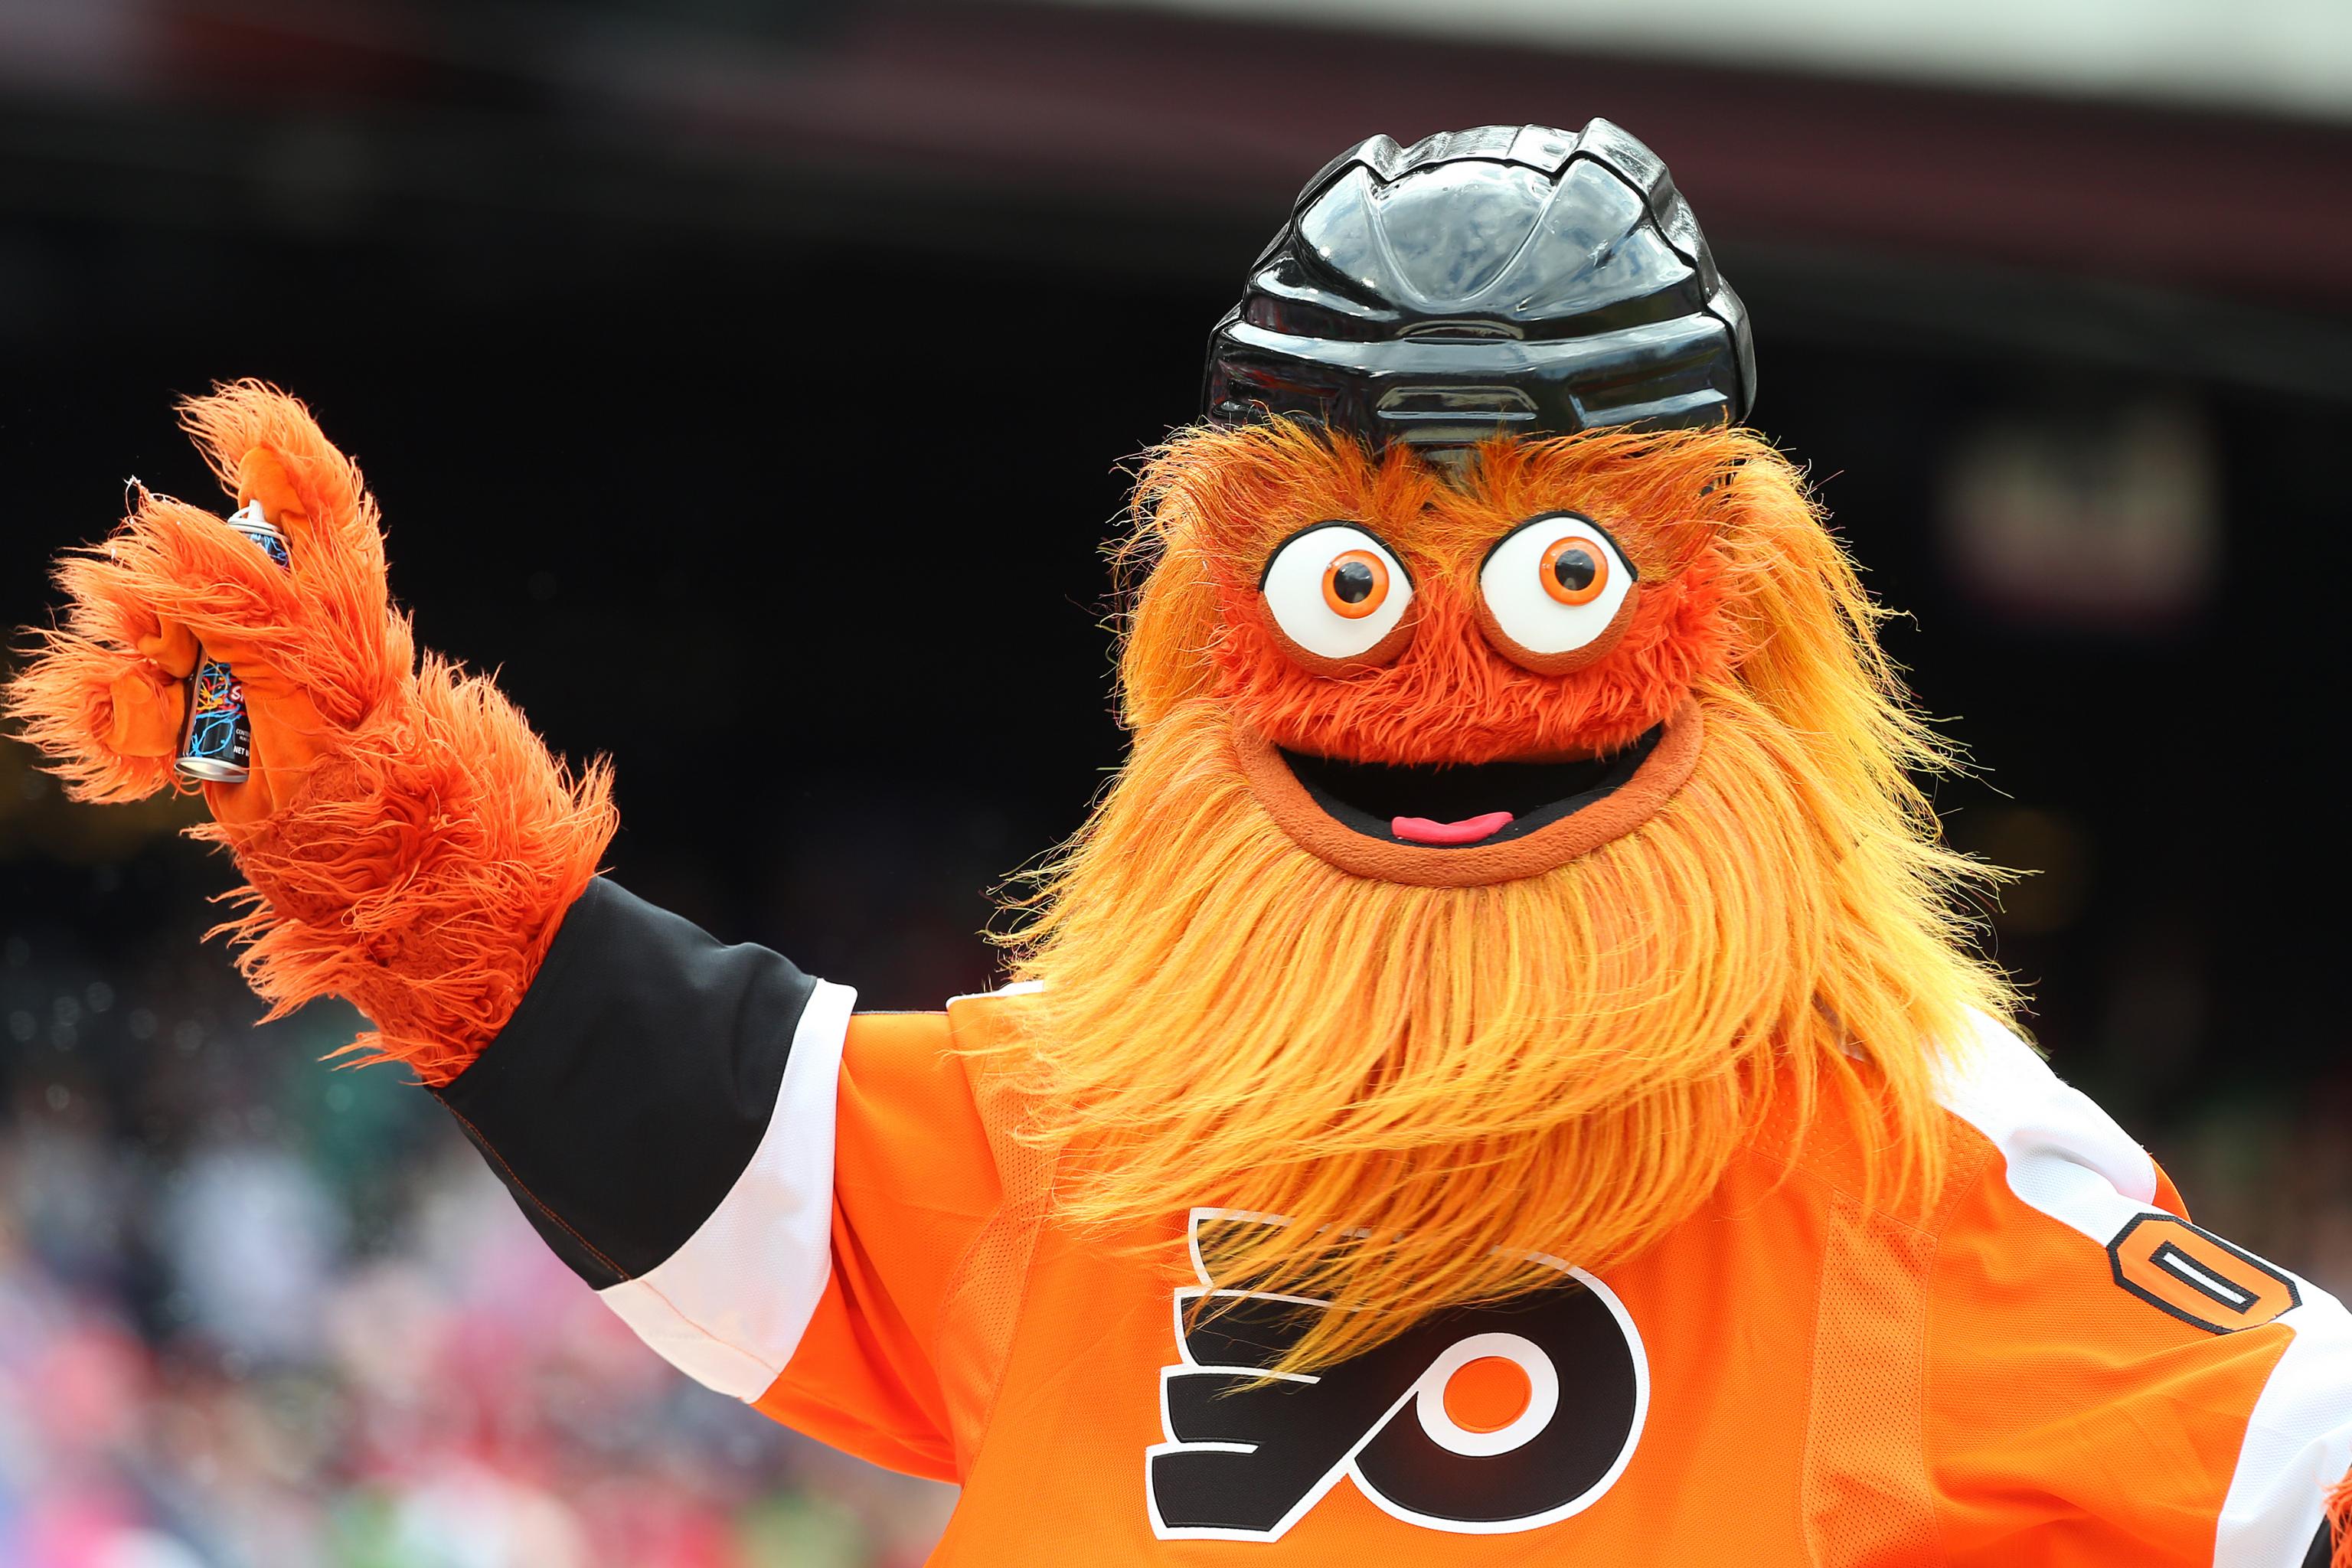 Police investigating after Gritty accused of punching 13-year-old in back -  NBC Sports